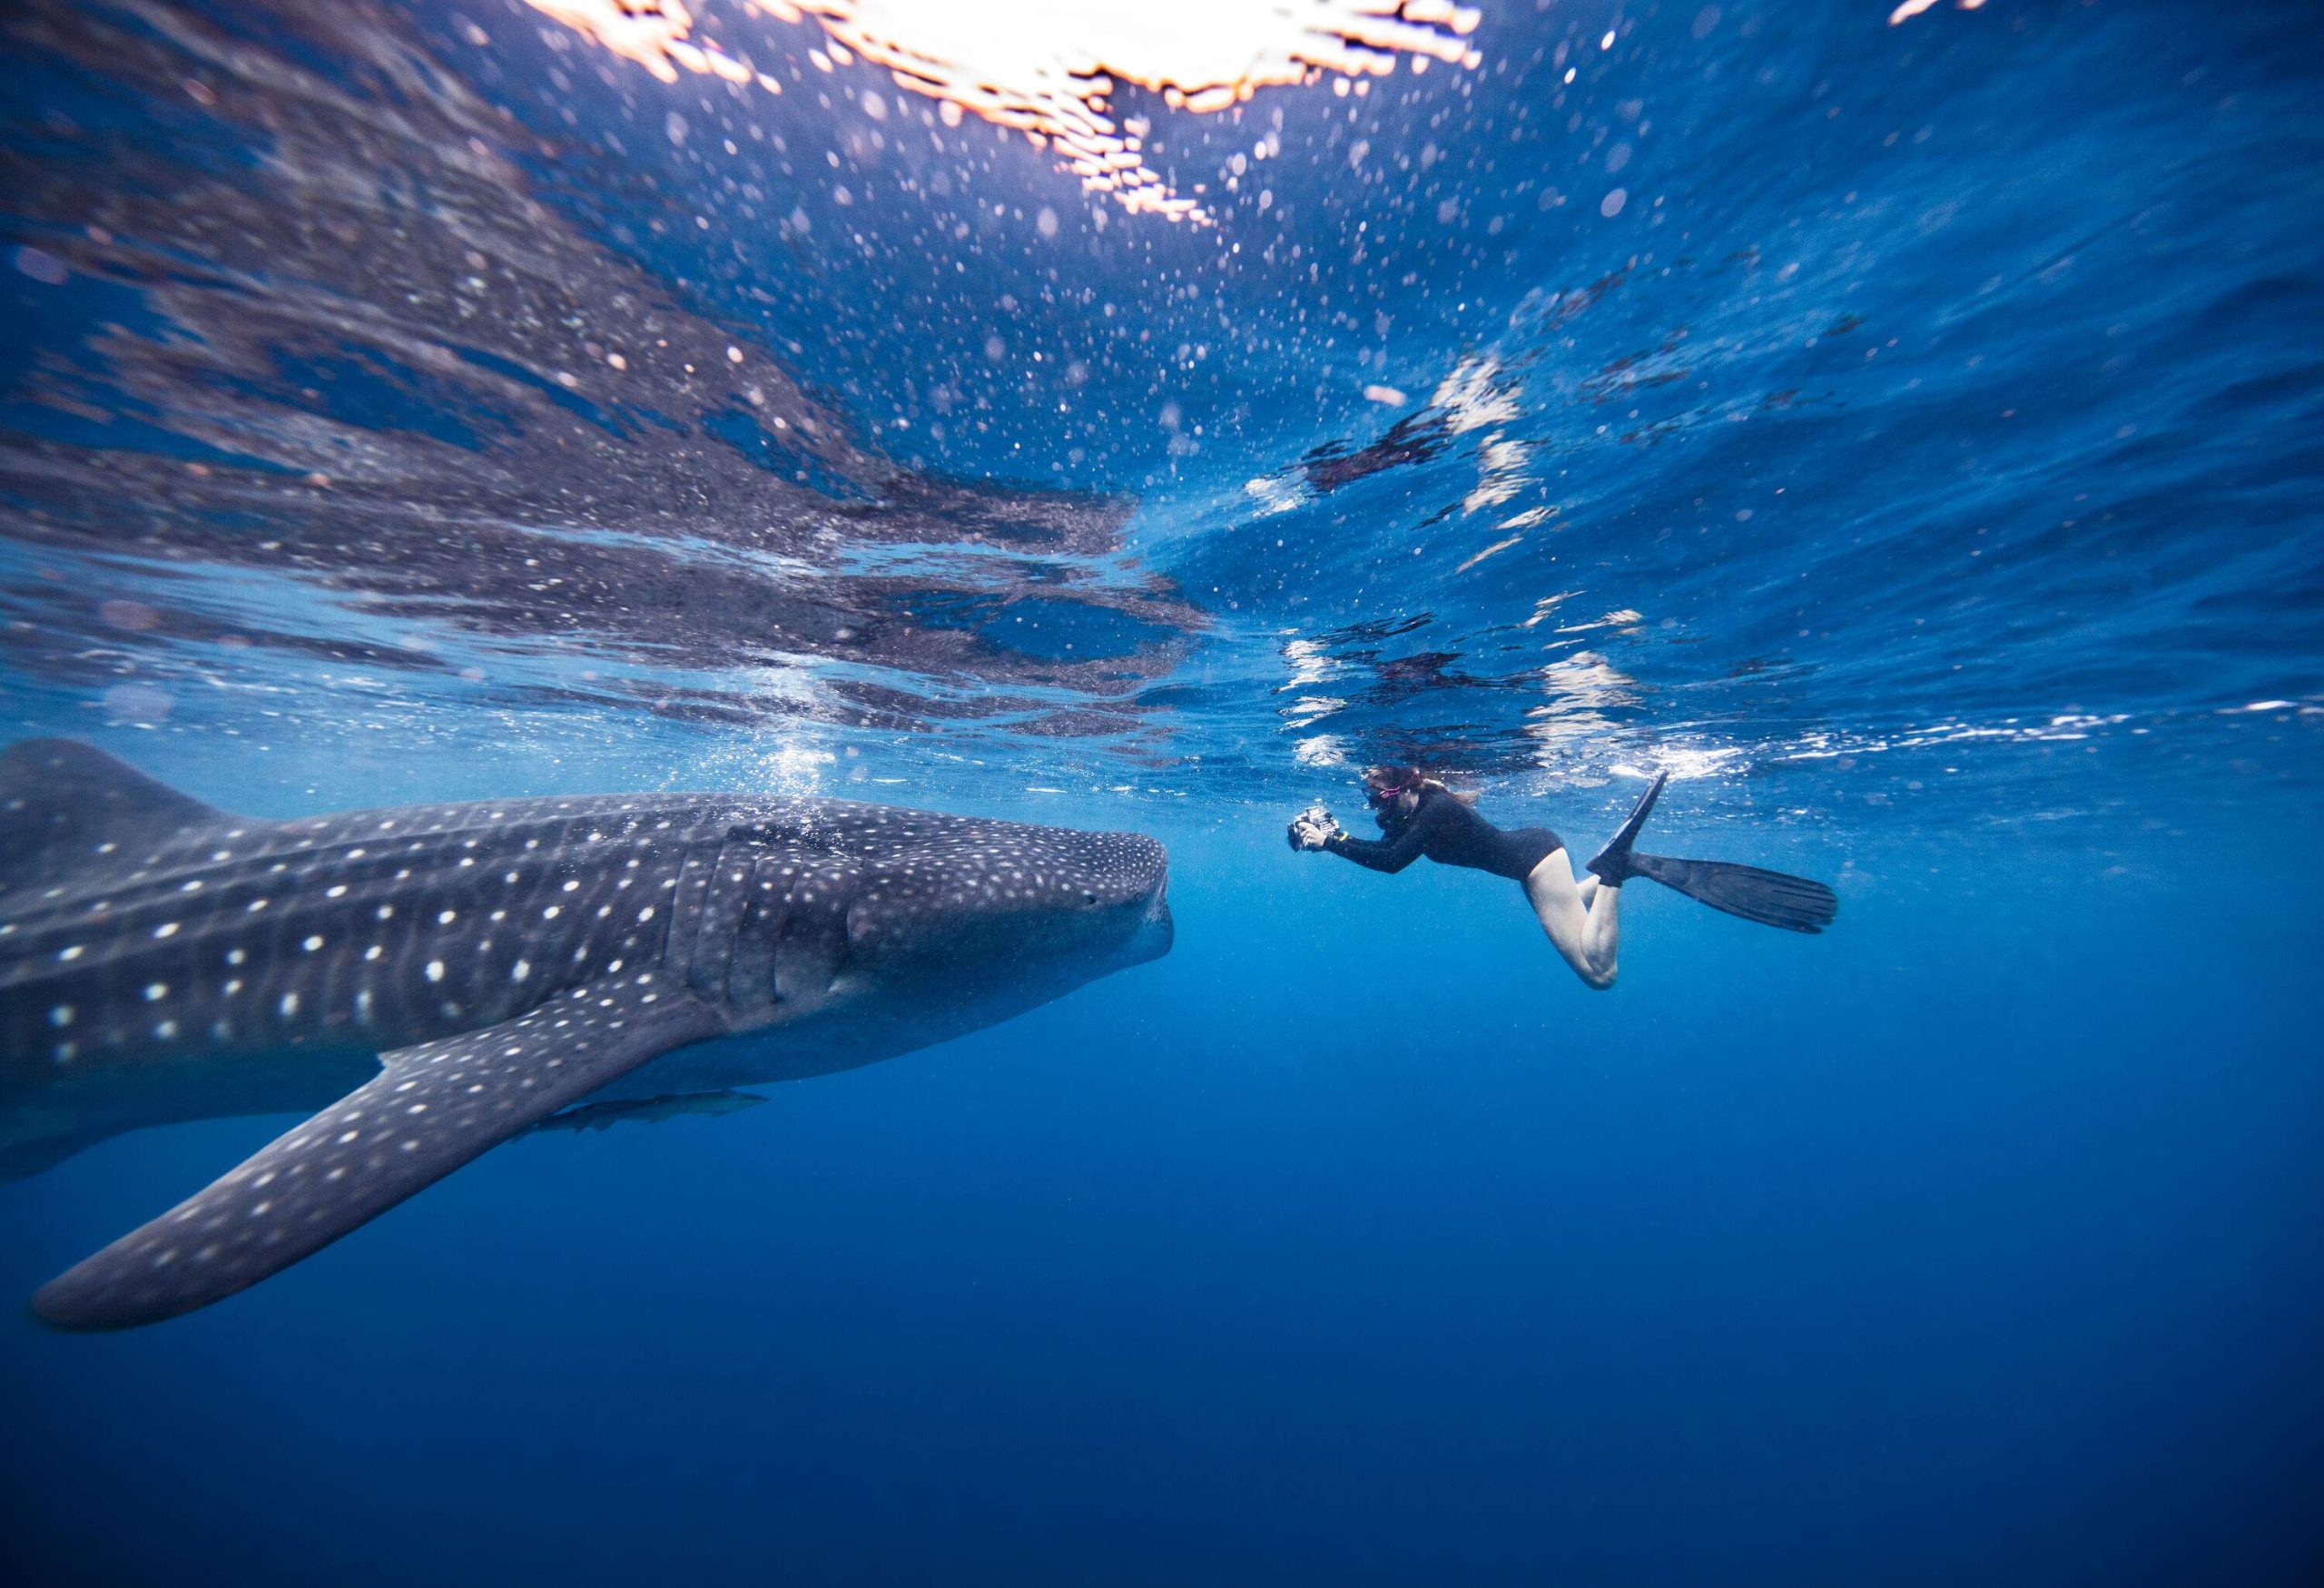 Underwater view of a person taking photos of a whale shark.